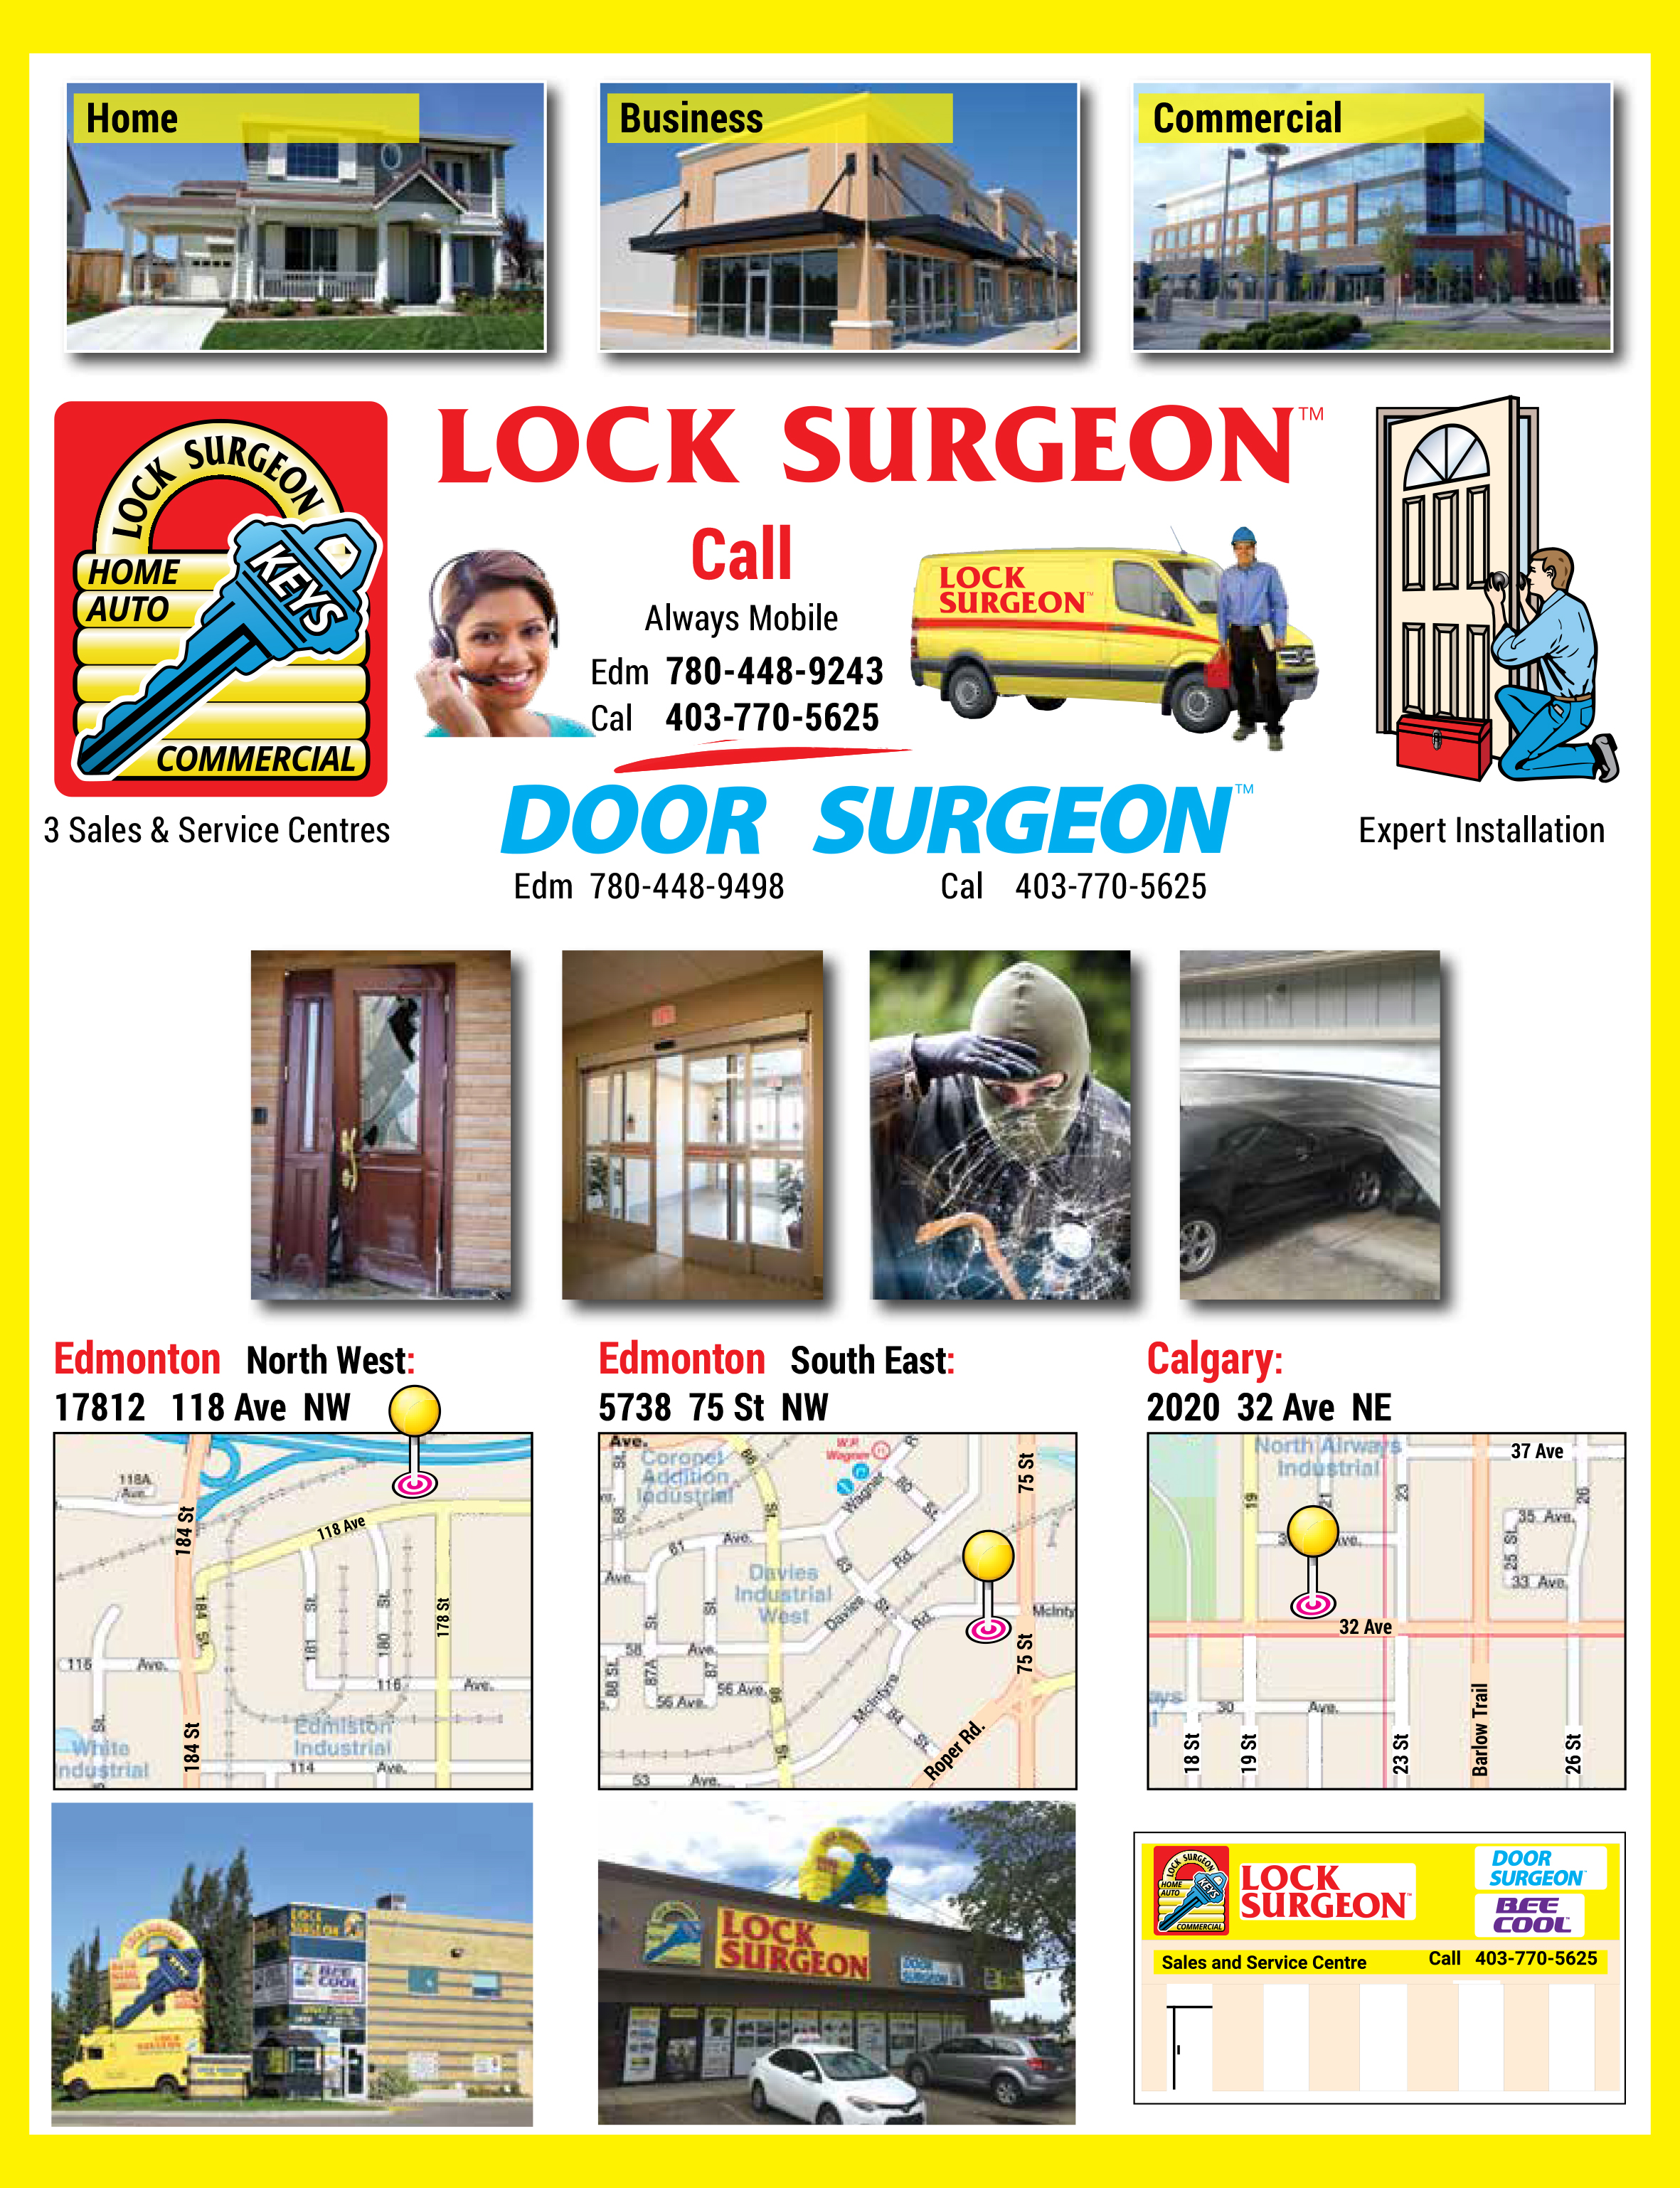 Door Surgeon provides in-store sales and service as well as mobile door service and installation. Visit one of our sales and service locations at Edmonton Northwest 17812-118 Ave NW, Edmonton Southeast 5738-75 St NW, Calgary 2020-32 Ave NE